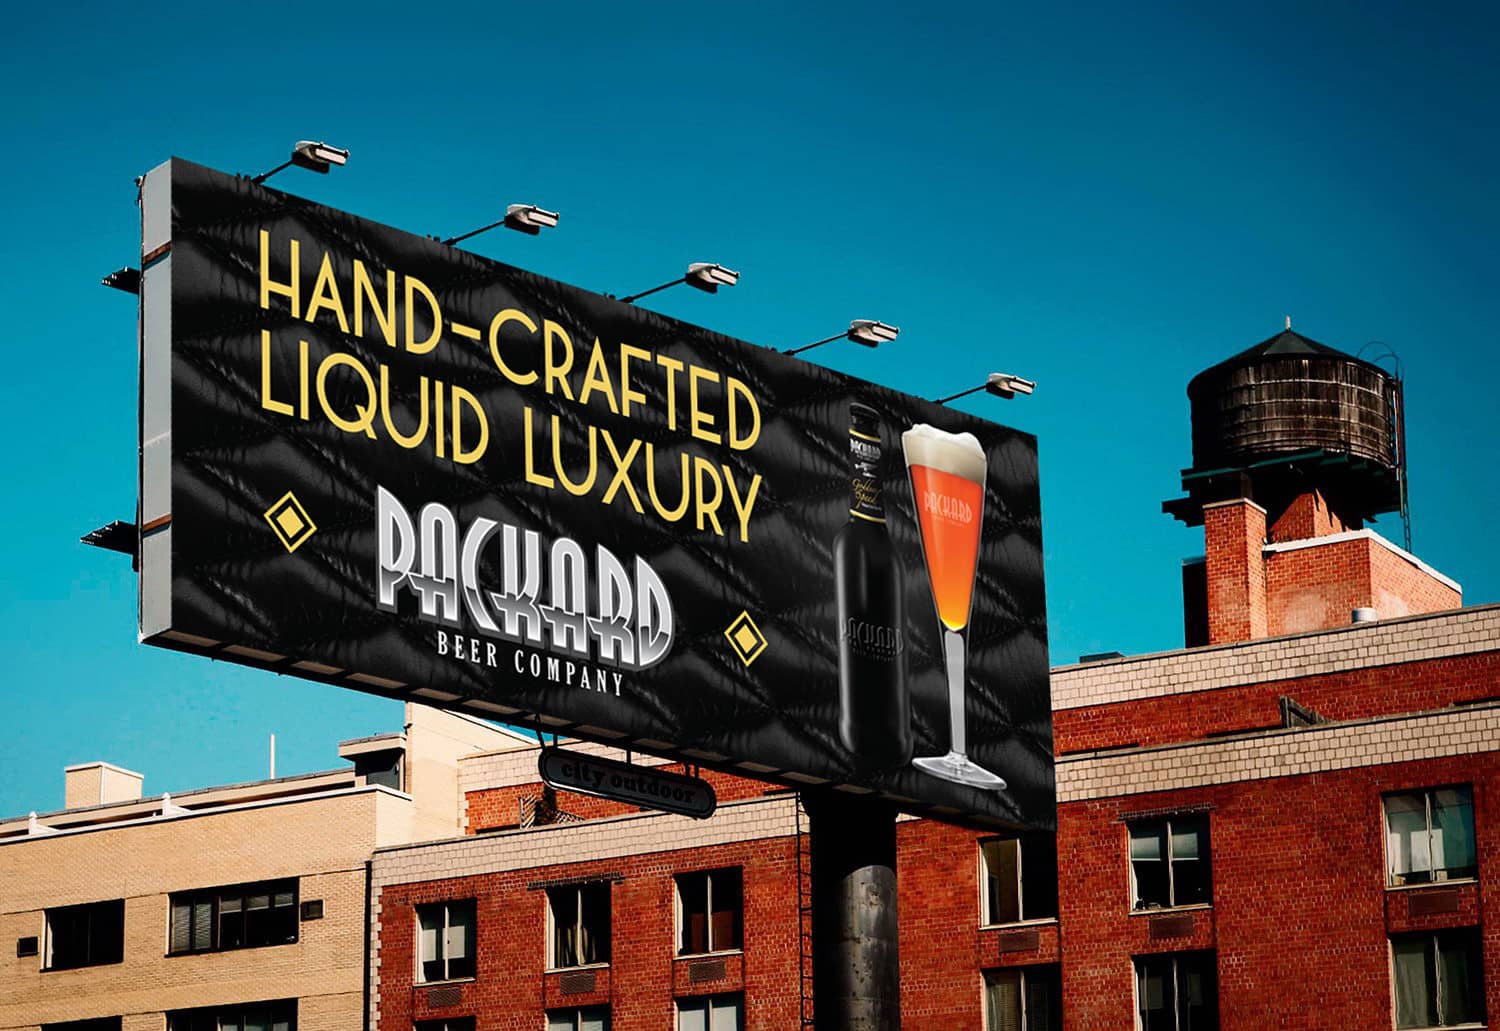 Packard Beer Company - Billboard - outdoor advertising - out-of-home advertising